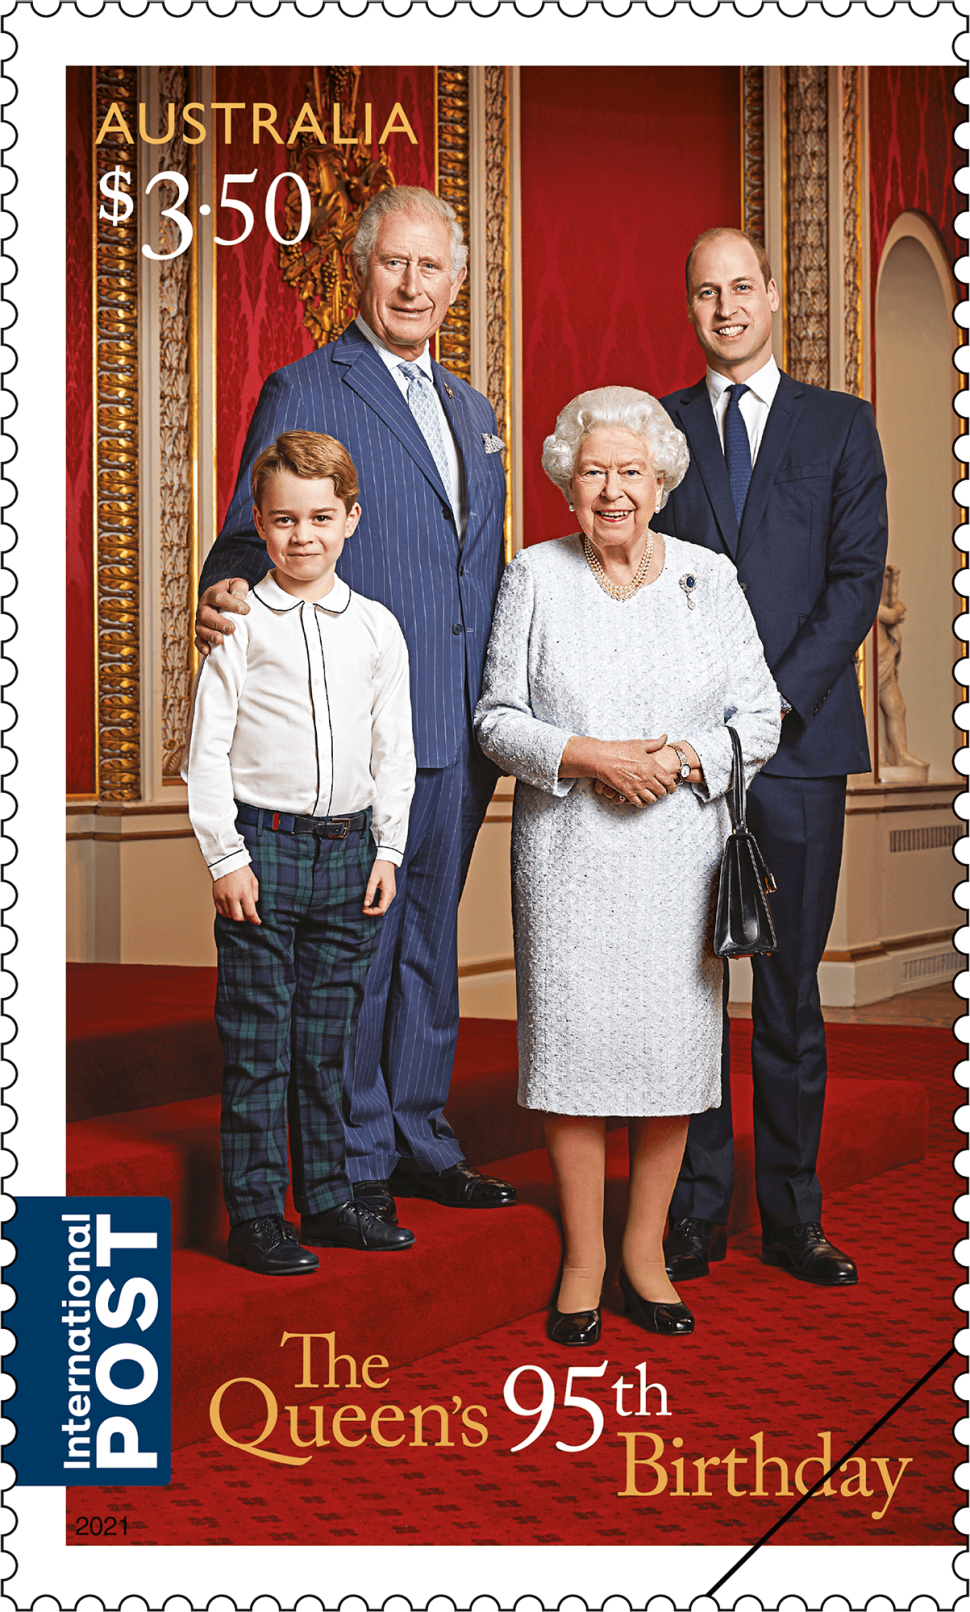 $3.50 The Queen and her heirs